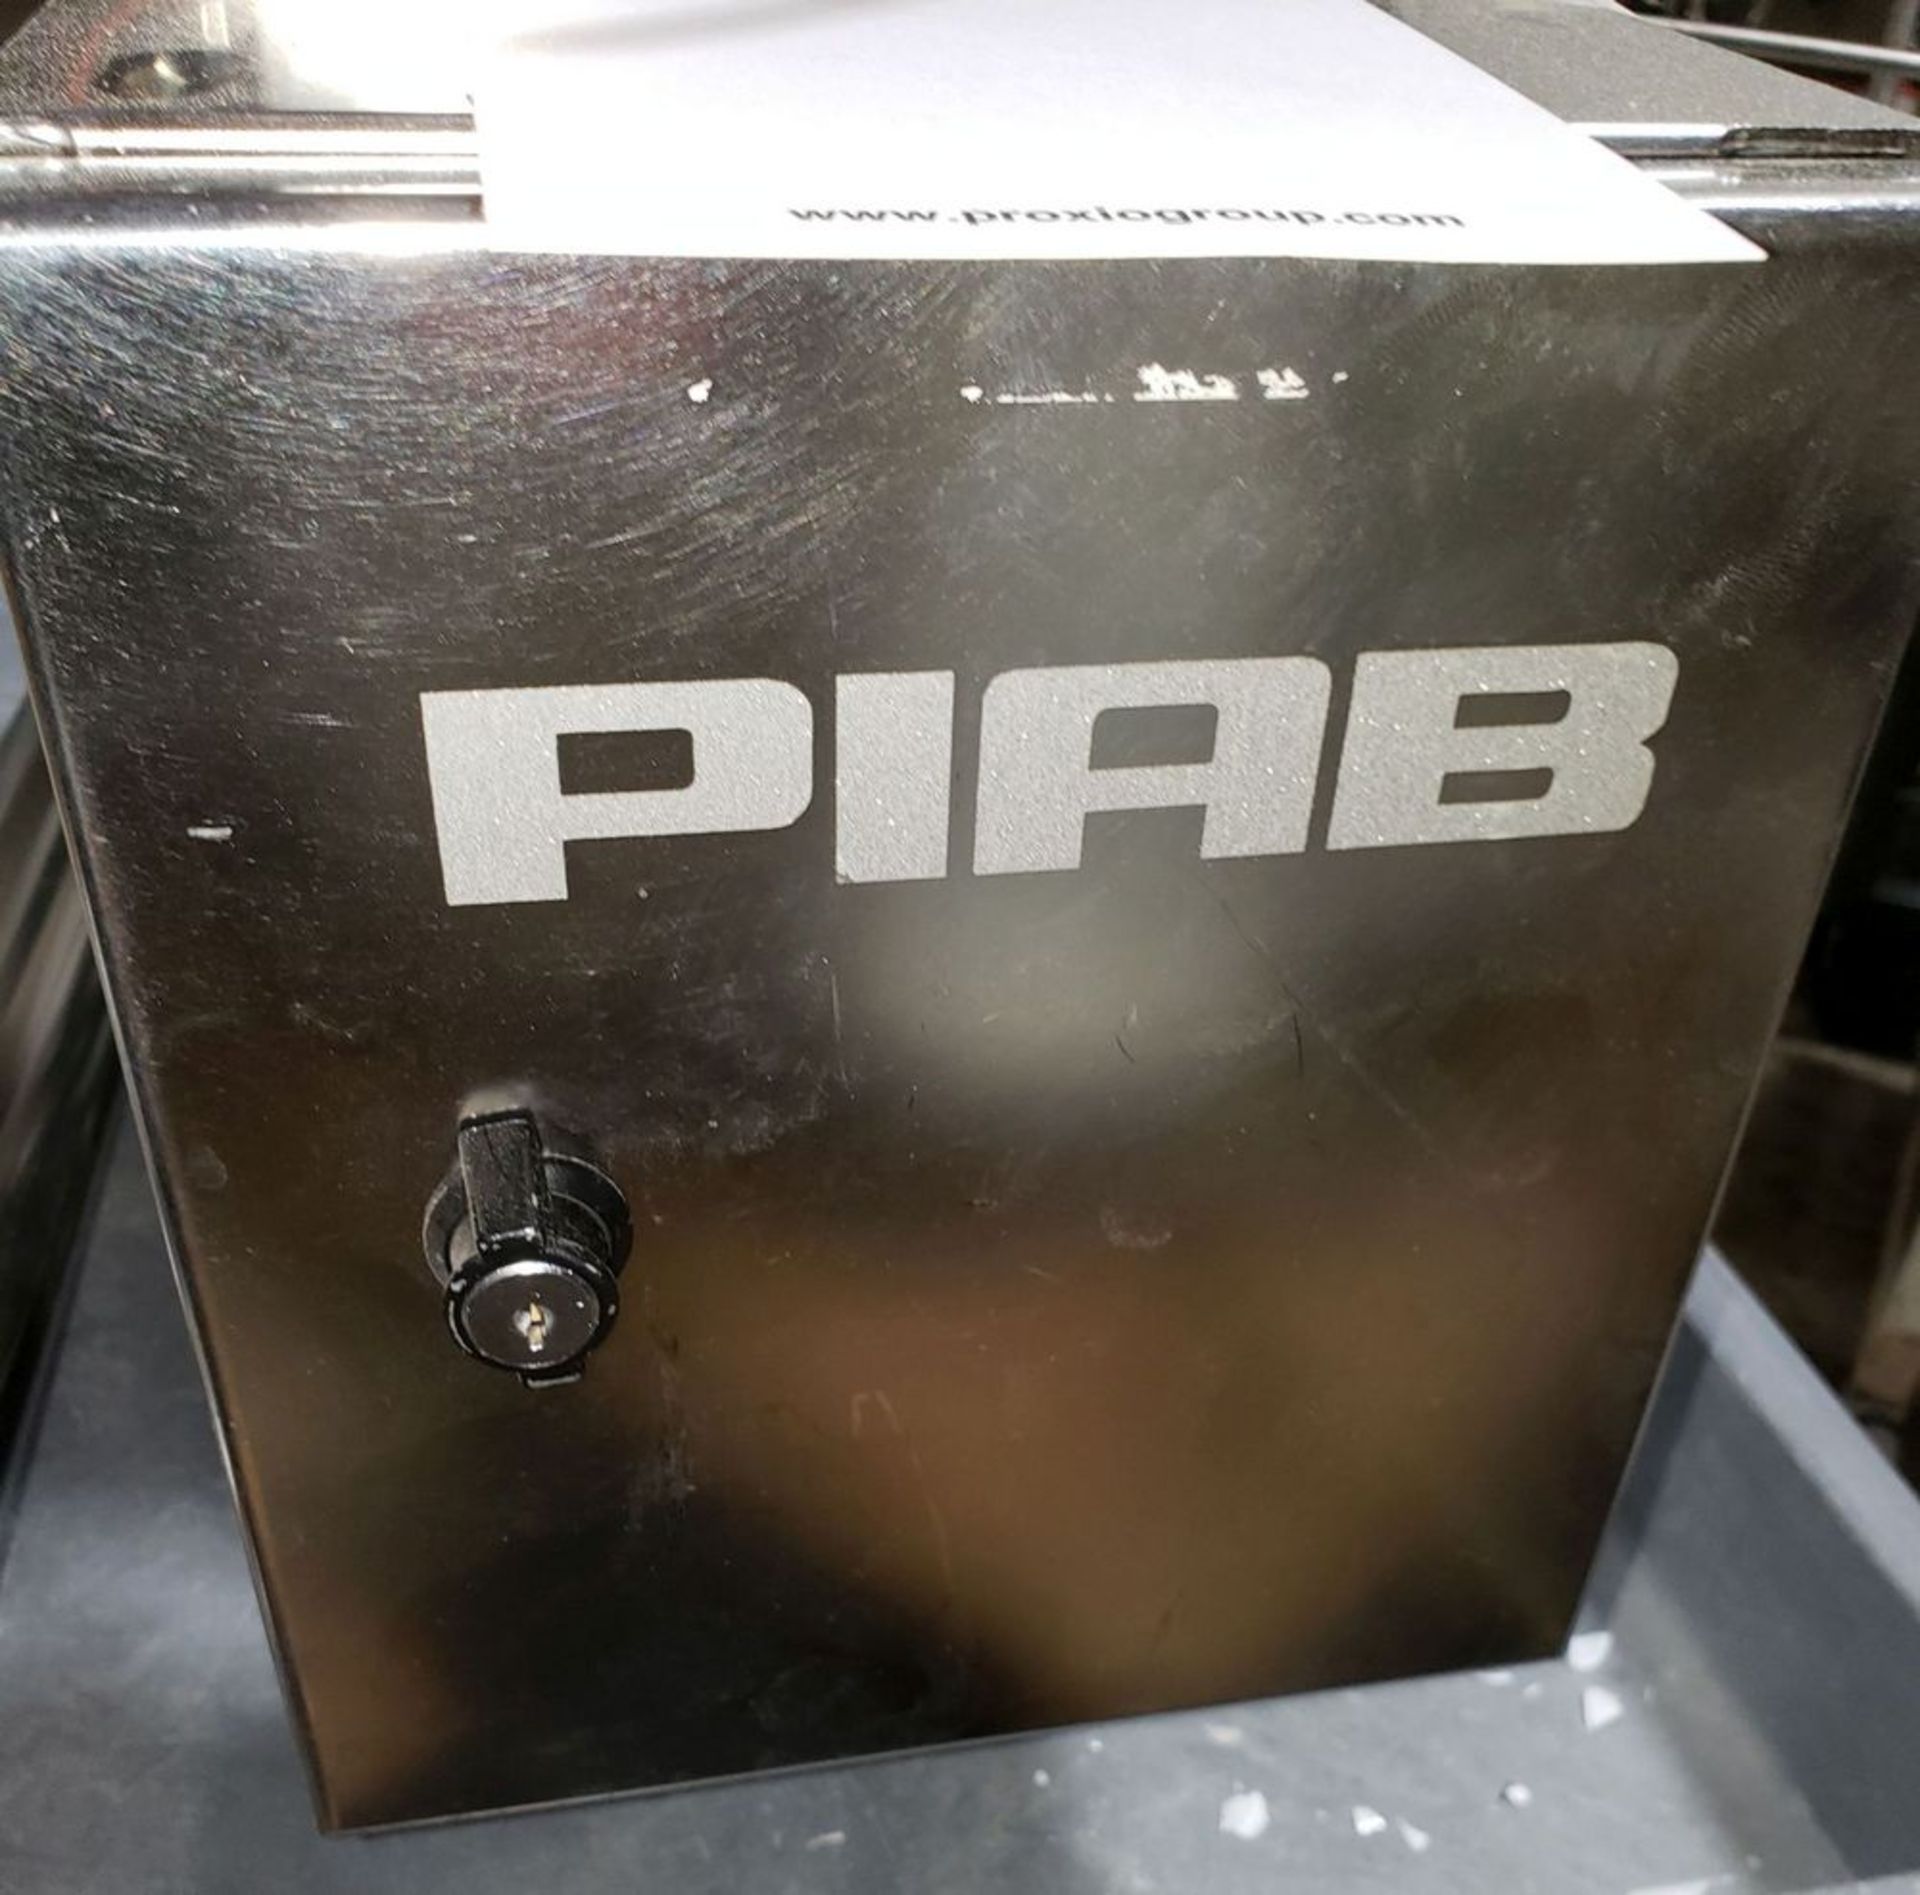 PIAB Vacuum sampler, model 0112995, all stainless steel construction - Image 3 of 16